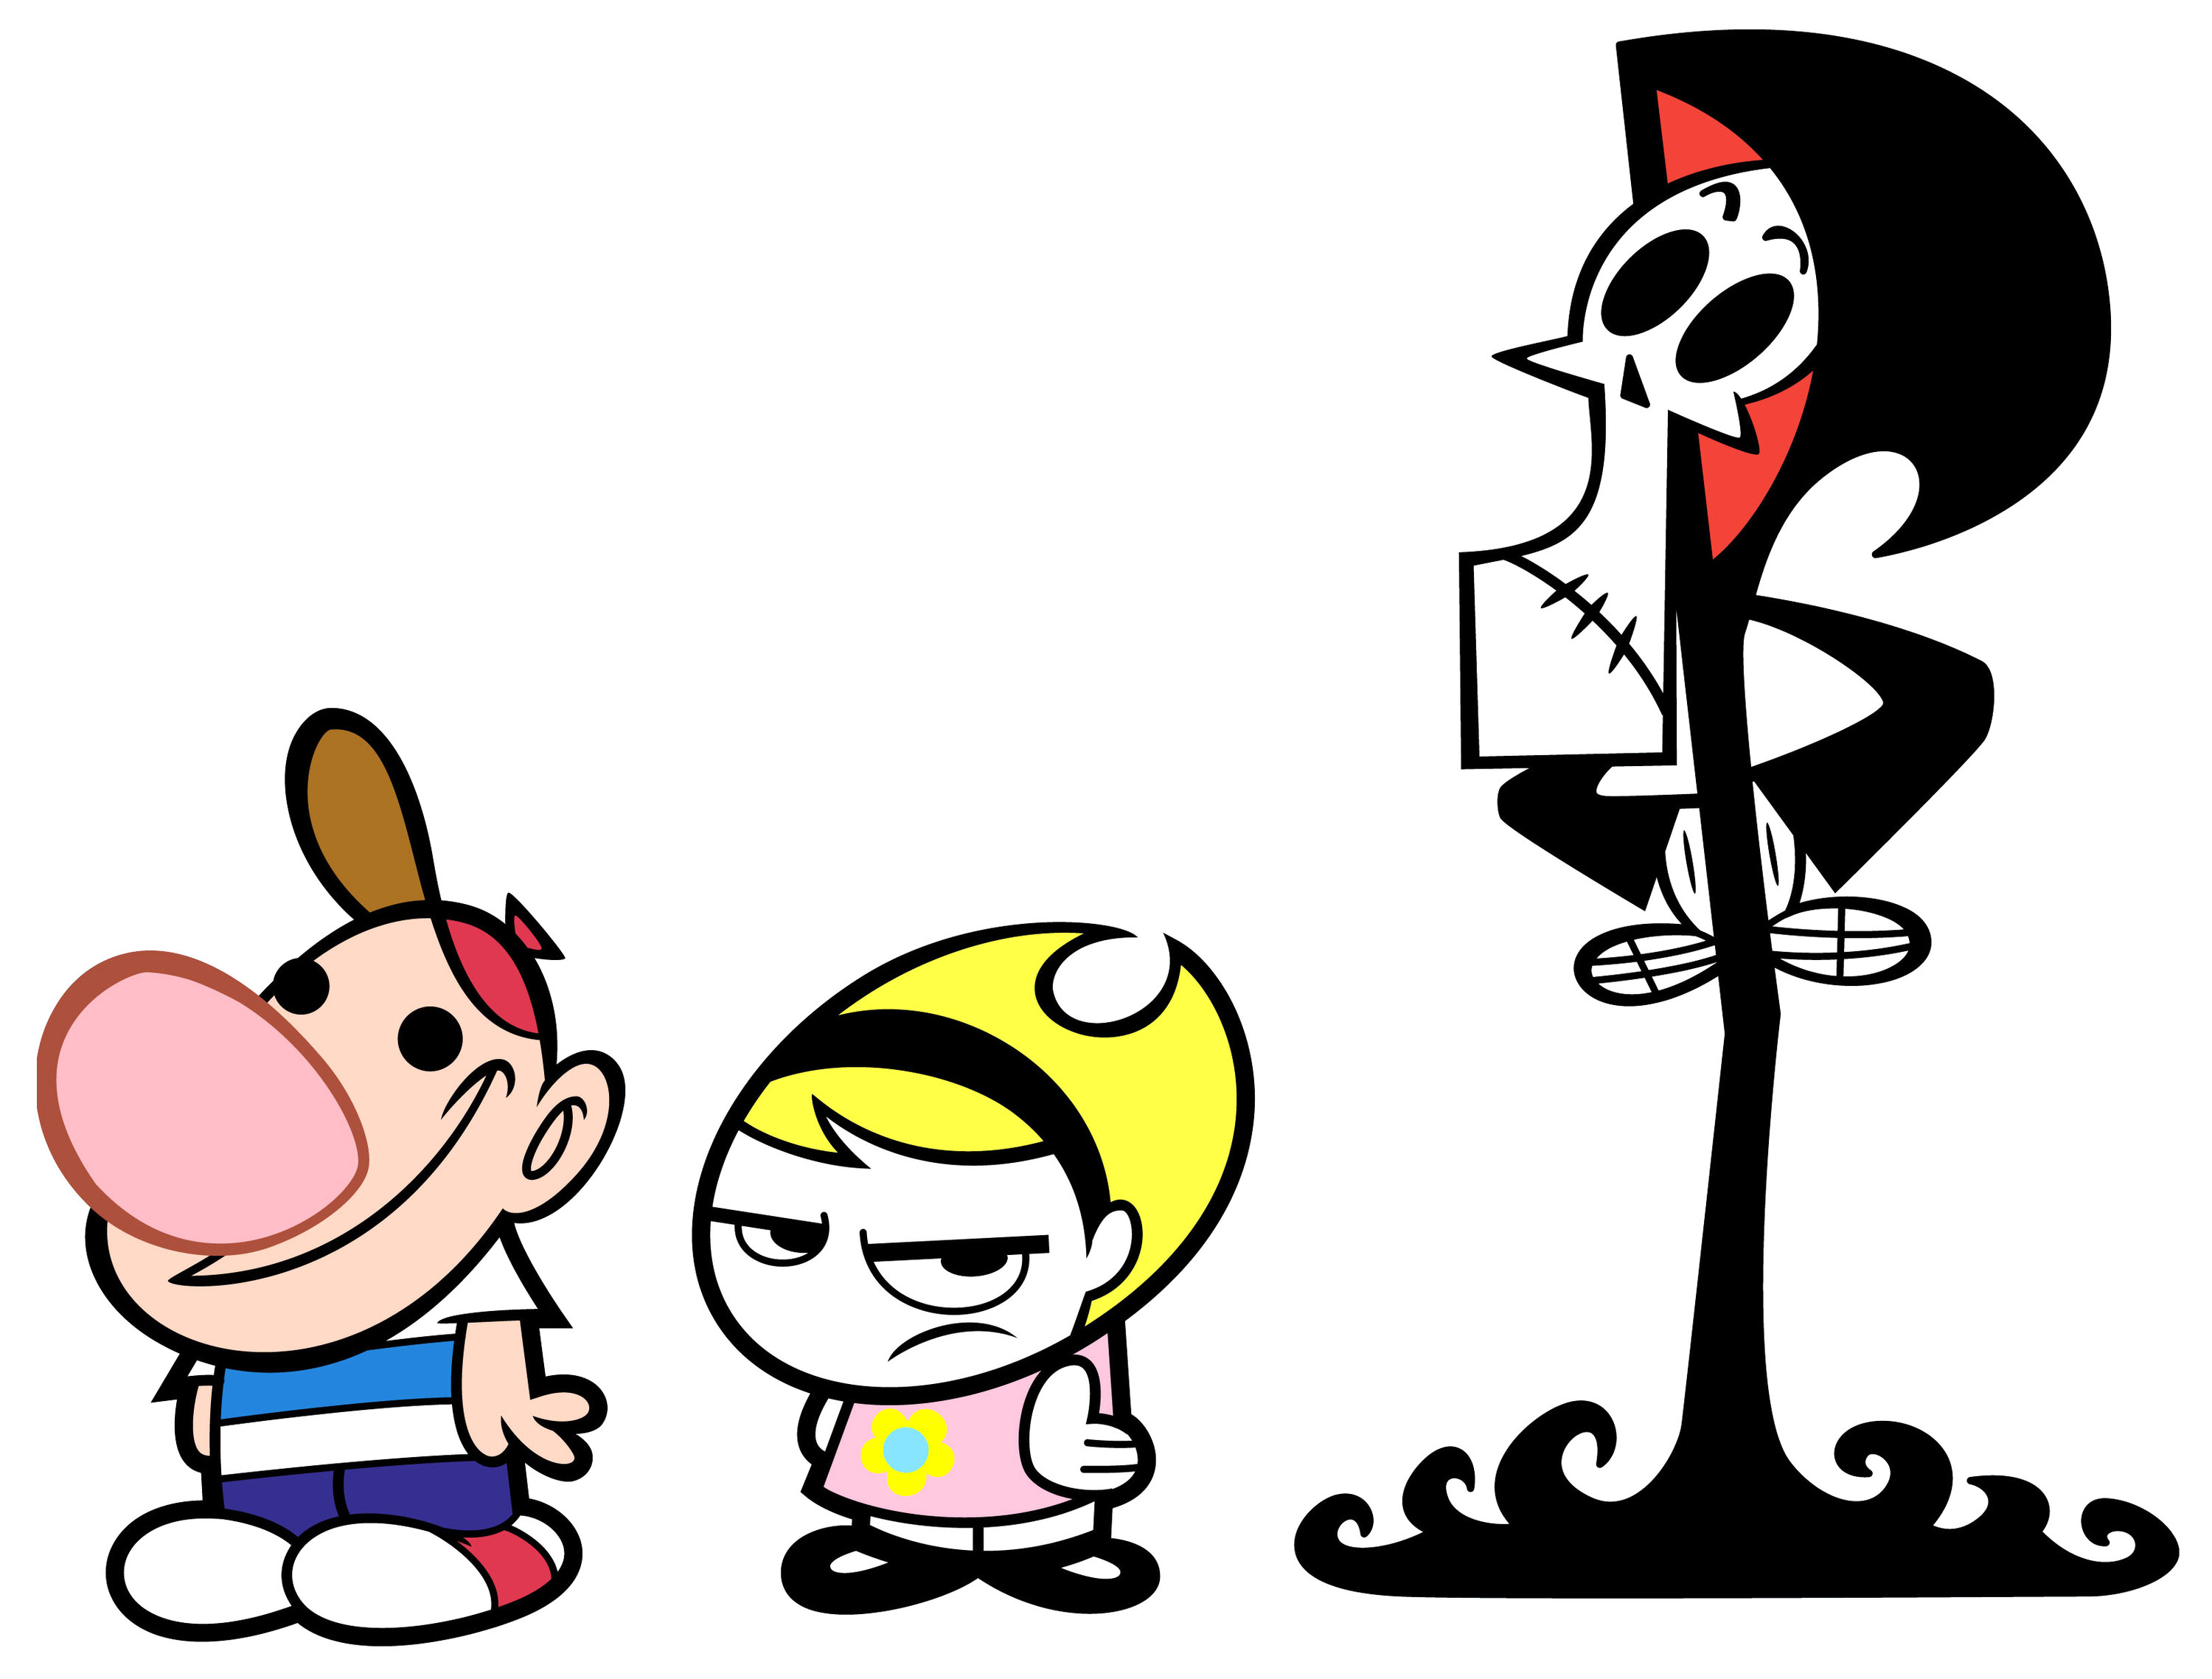 Billy, a boy with beady eyes and big pink nose, stands next to Mandy, forlorn girl with frown, and Grim, a reaper who stands with his hands on his hips.